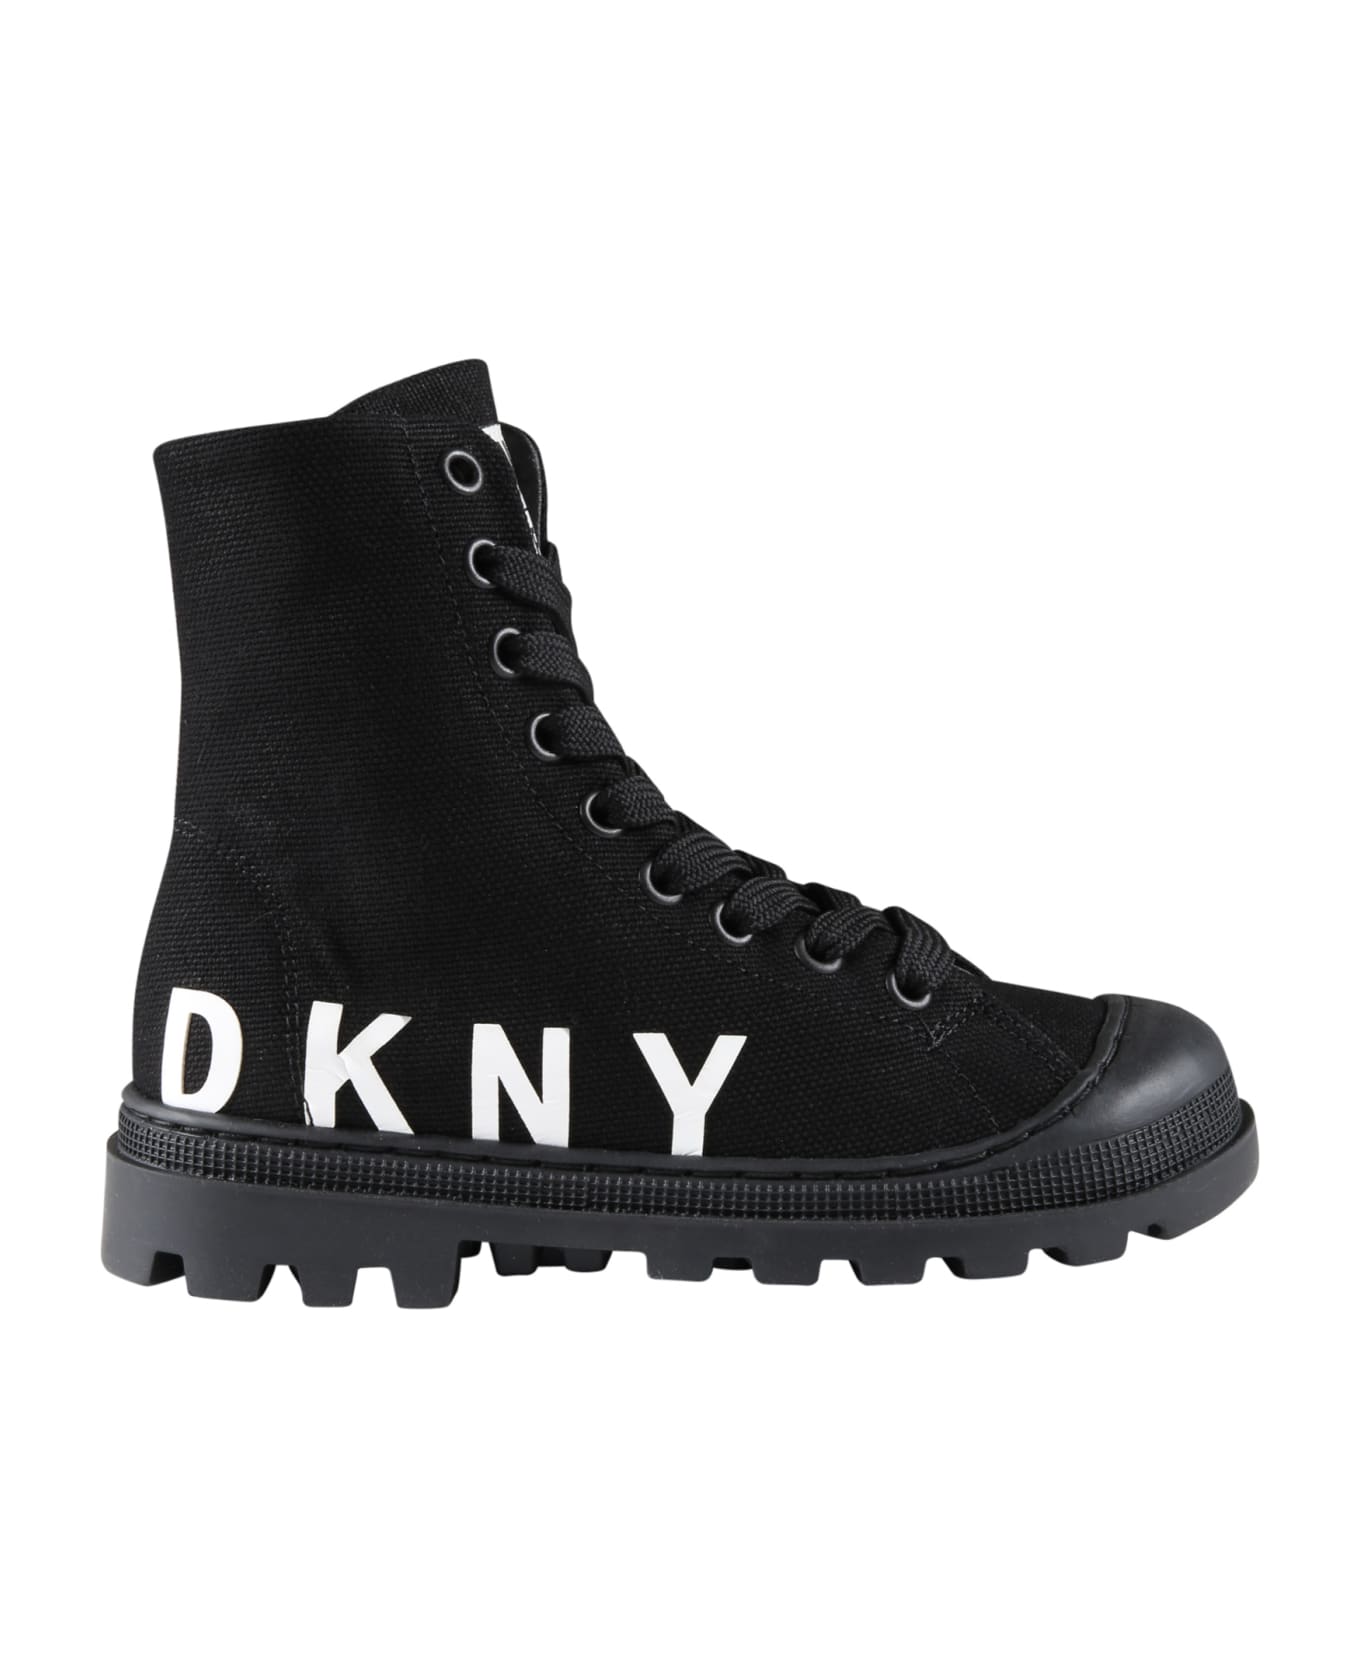 DKNY Black Sneakers For Girl With White Logo - Black